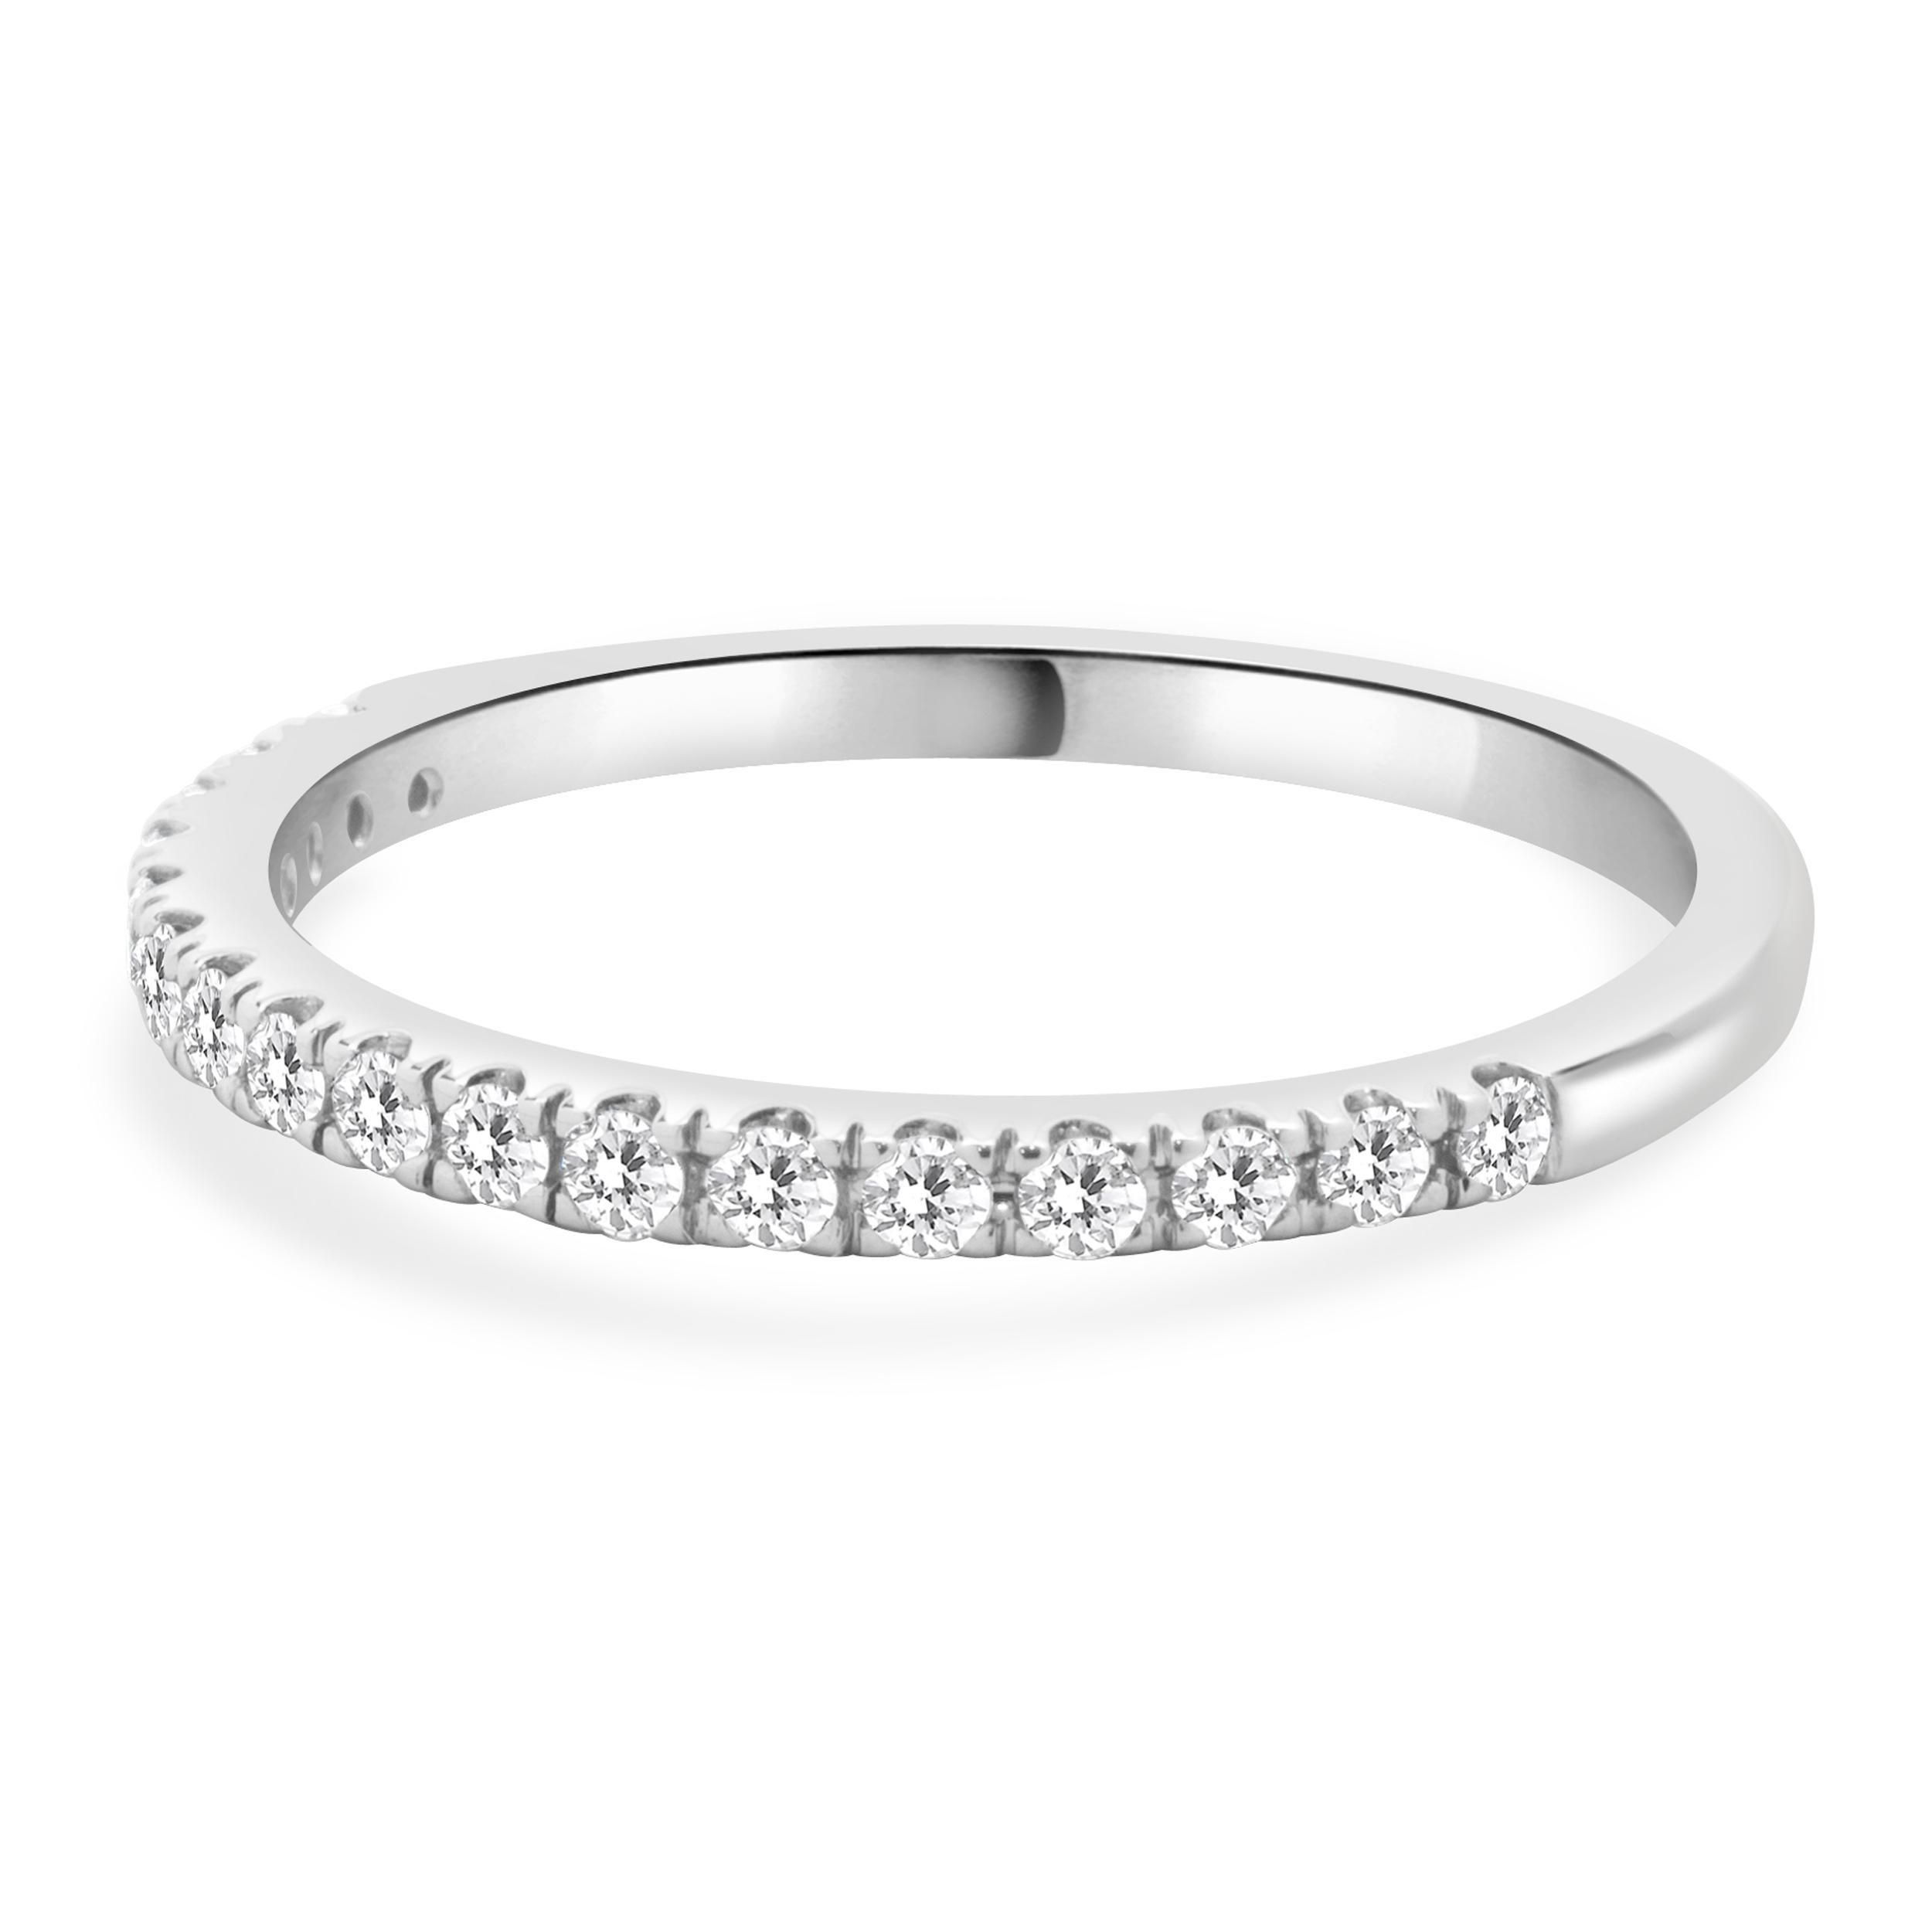 
Designer: Custom
Material: 14K white gold
Diamonds: 17 round brilliant cut = 0.25cttw
Color: G
Clarity: VS1-2
Size: 7 sizing available 
Dimensions: ring measures 2mm in width
Weight: 1.76 grams
